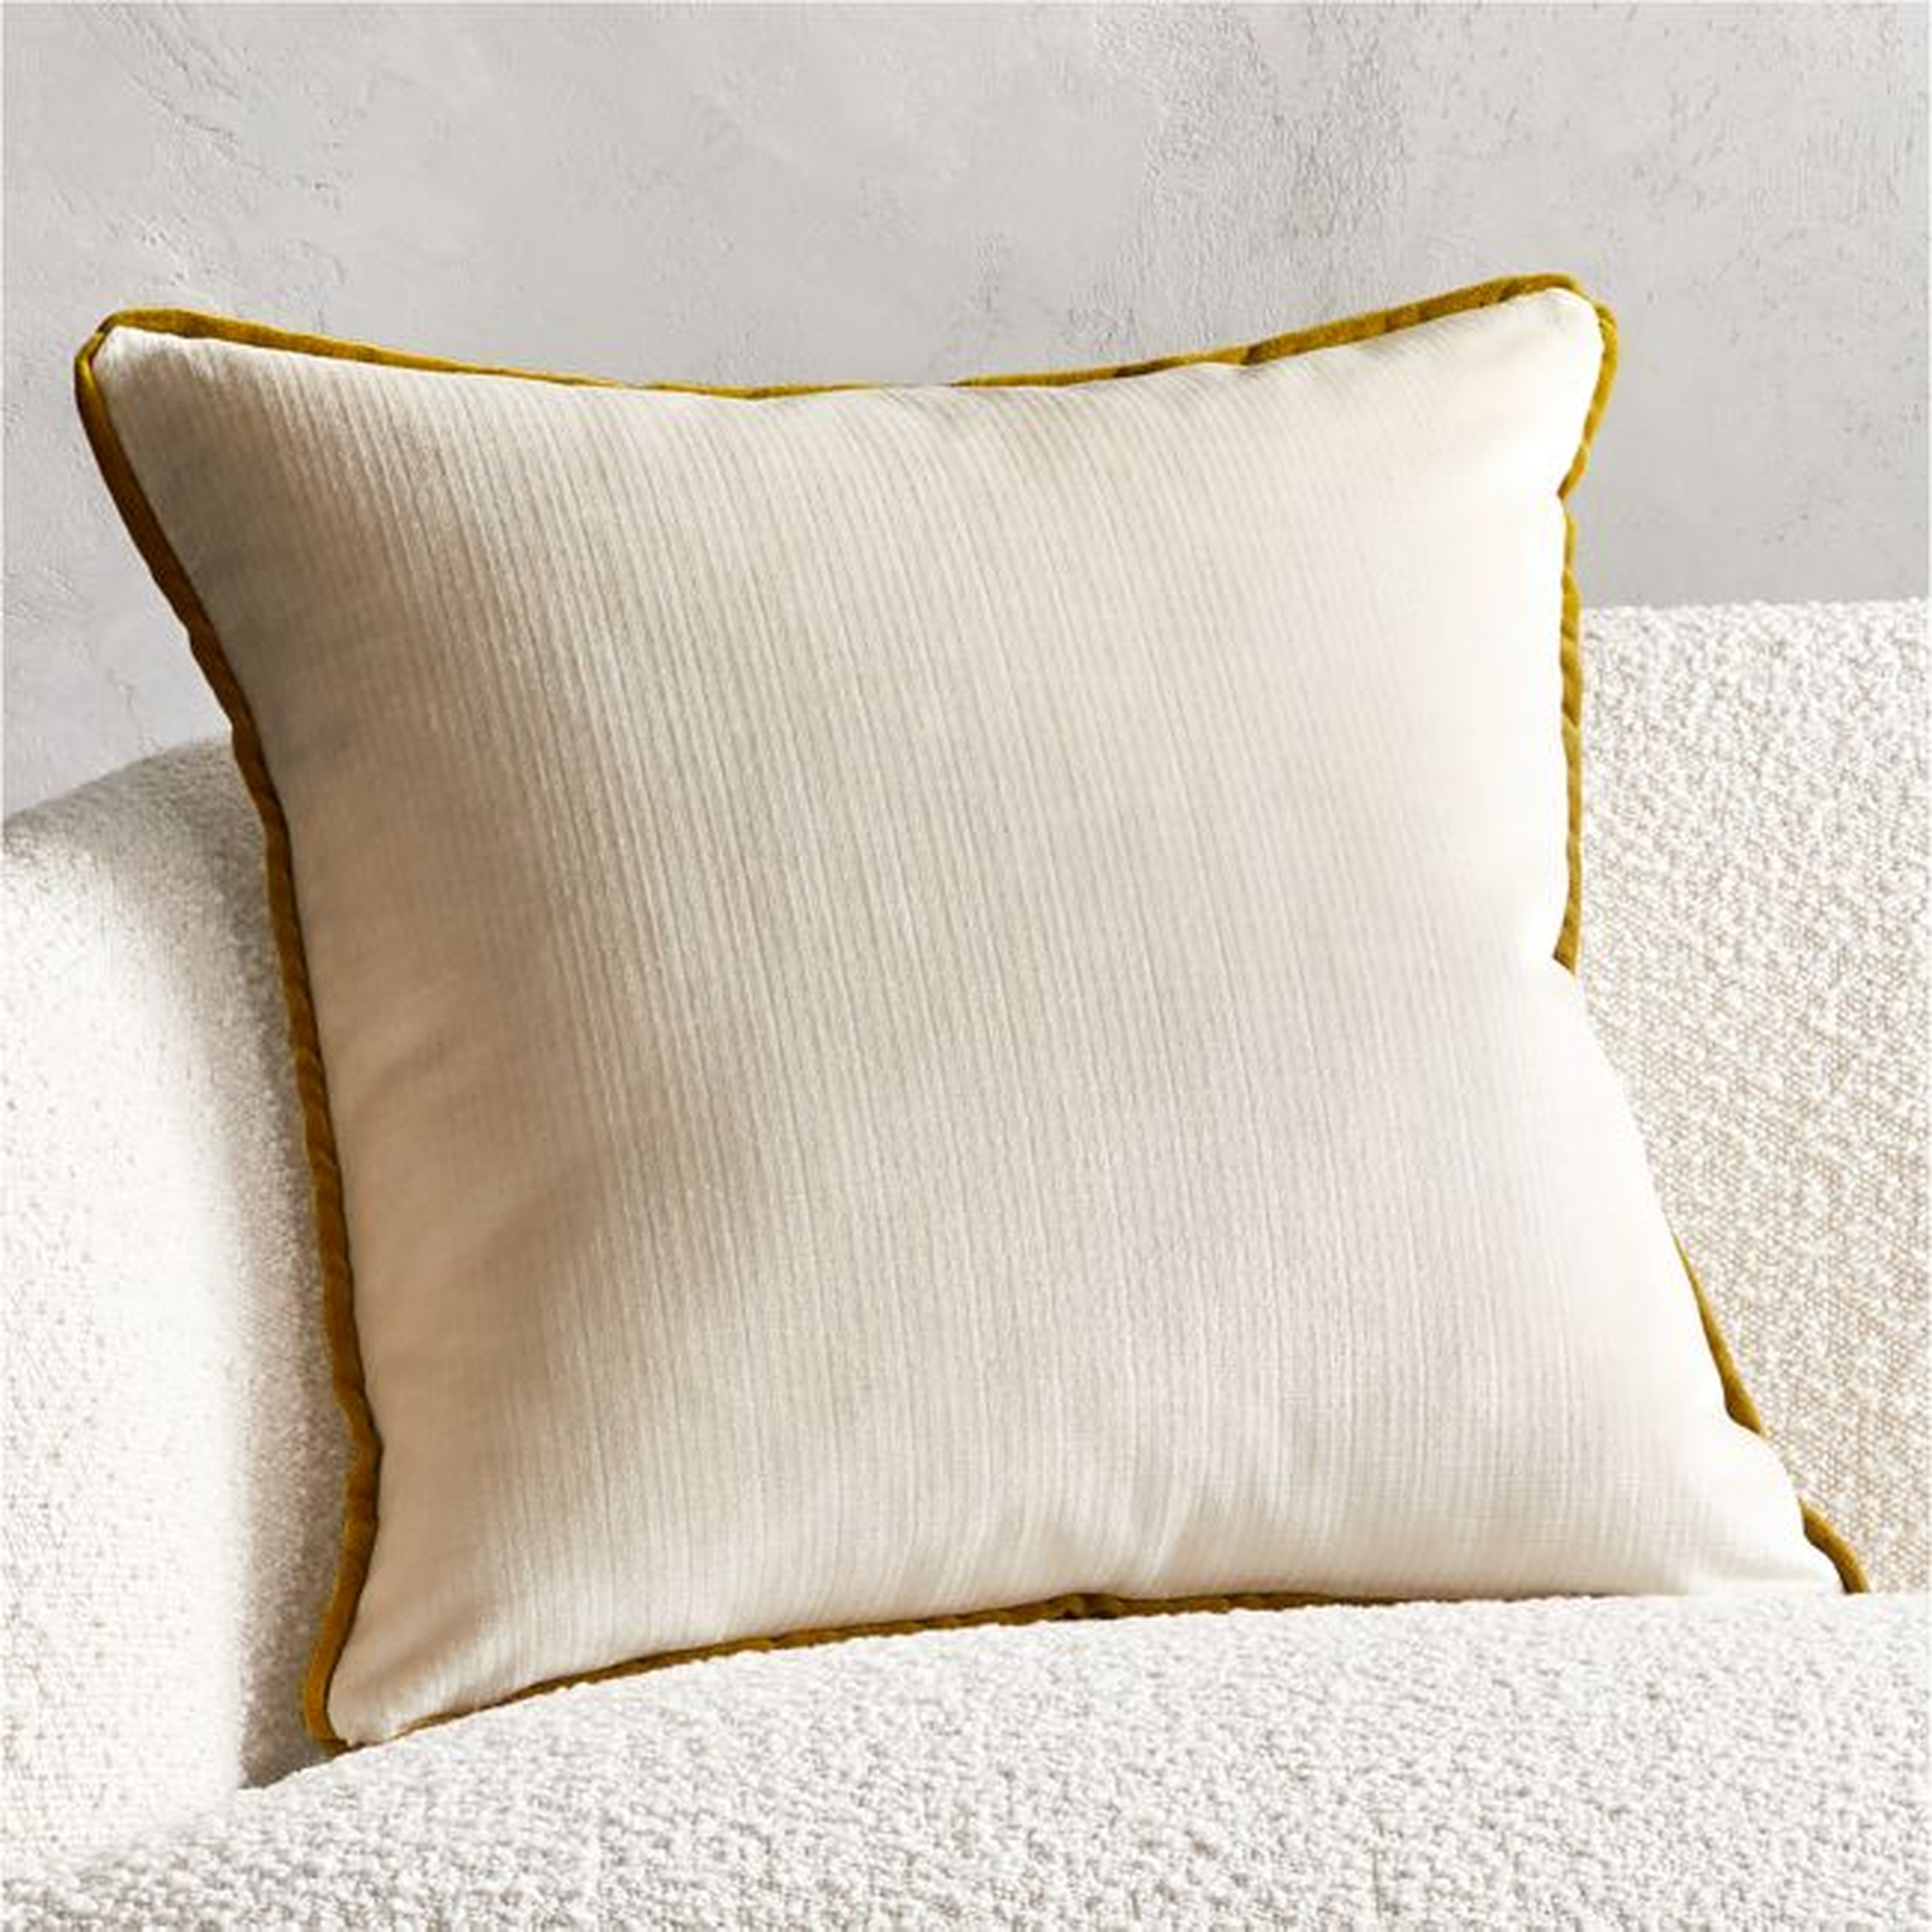 20" Gleam Ivory Pillow with Feather-Down Insert - CB2